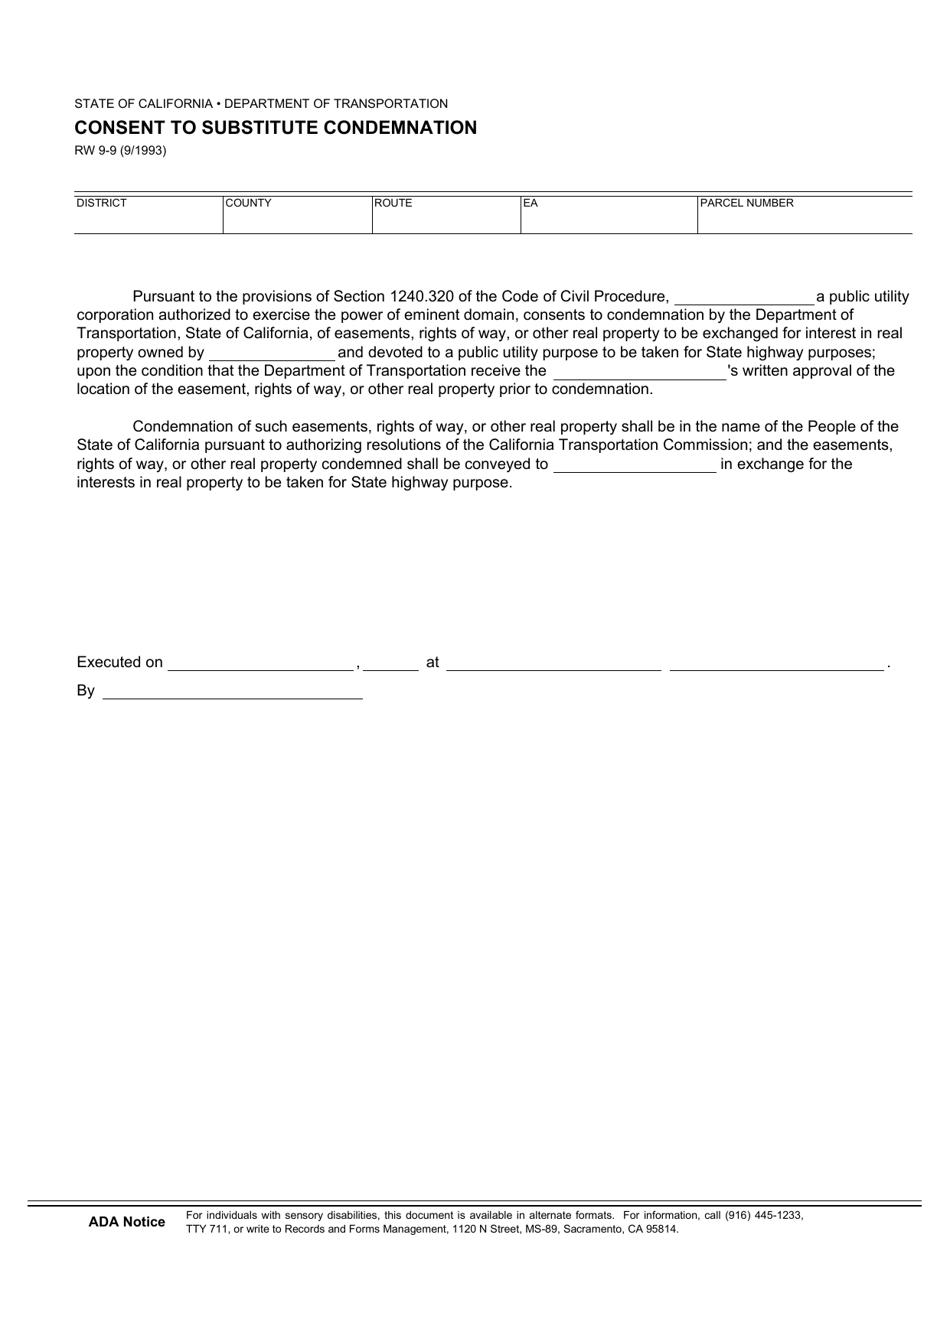 Form RW9-9 Consent to Substitute Condemnation - California, Page 1